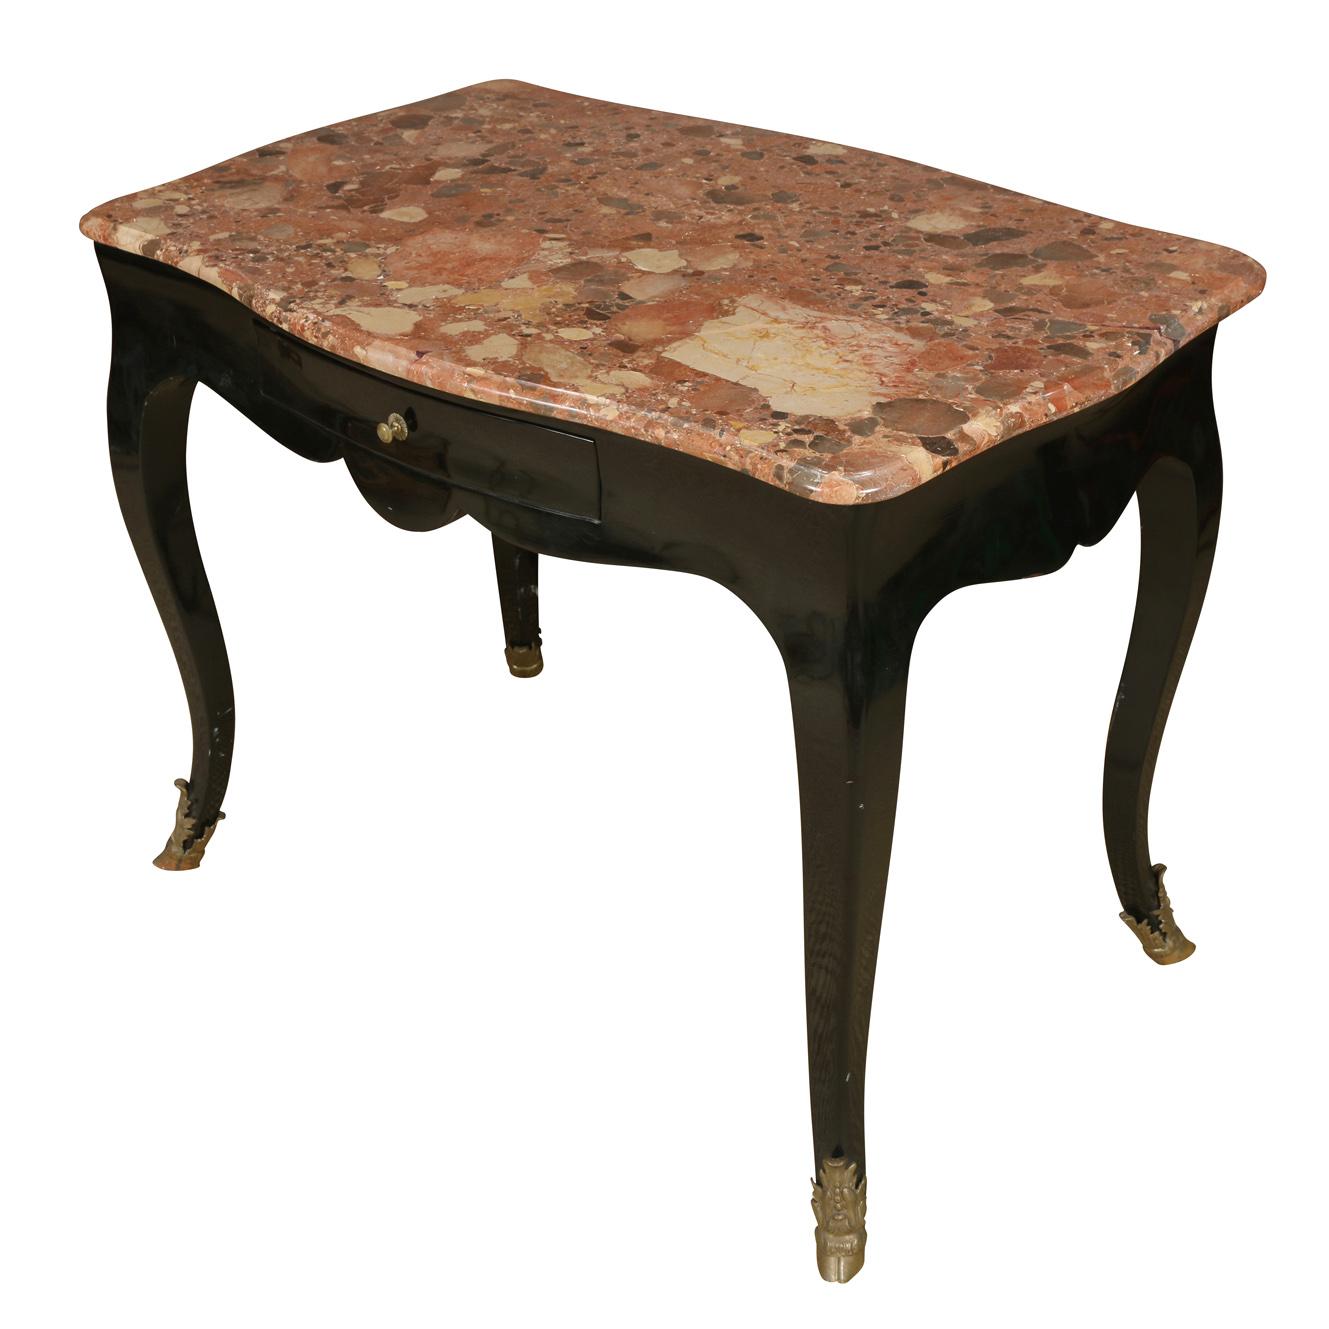 Ebonized antique French writing desk with coral marble top, a single drawer, and cabriole legs ending in brass hoof caps.